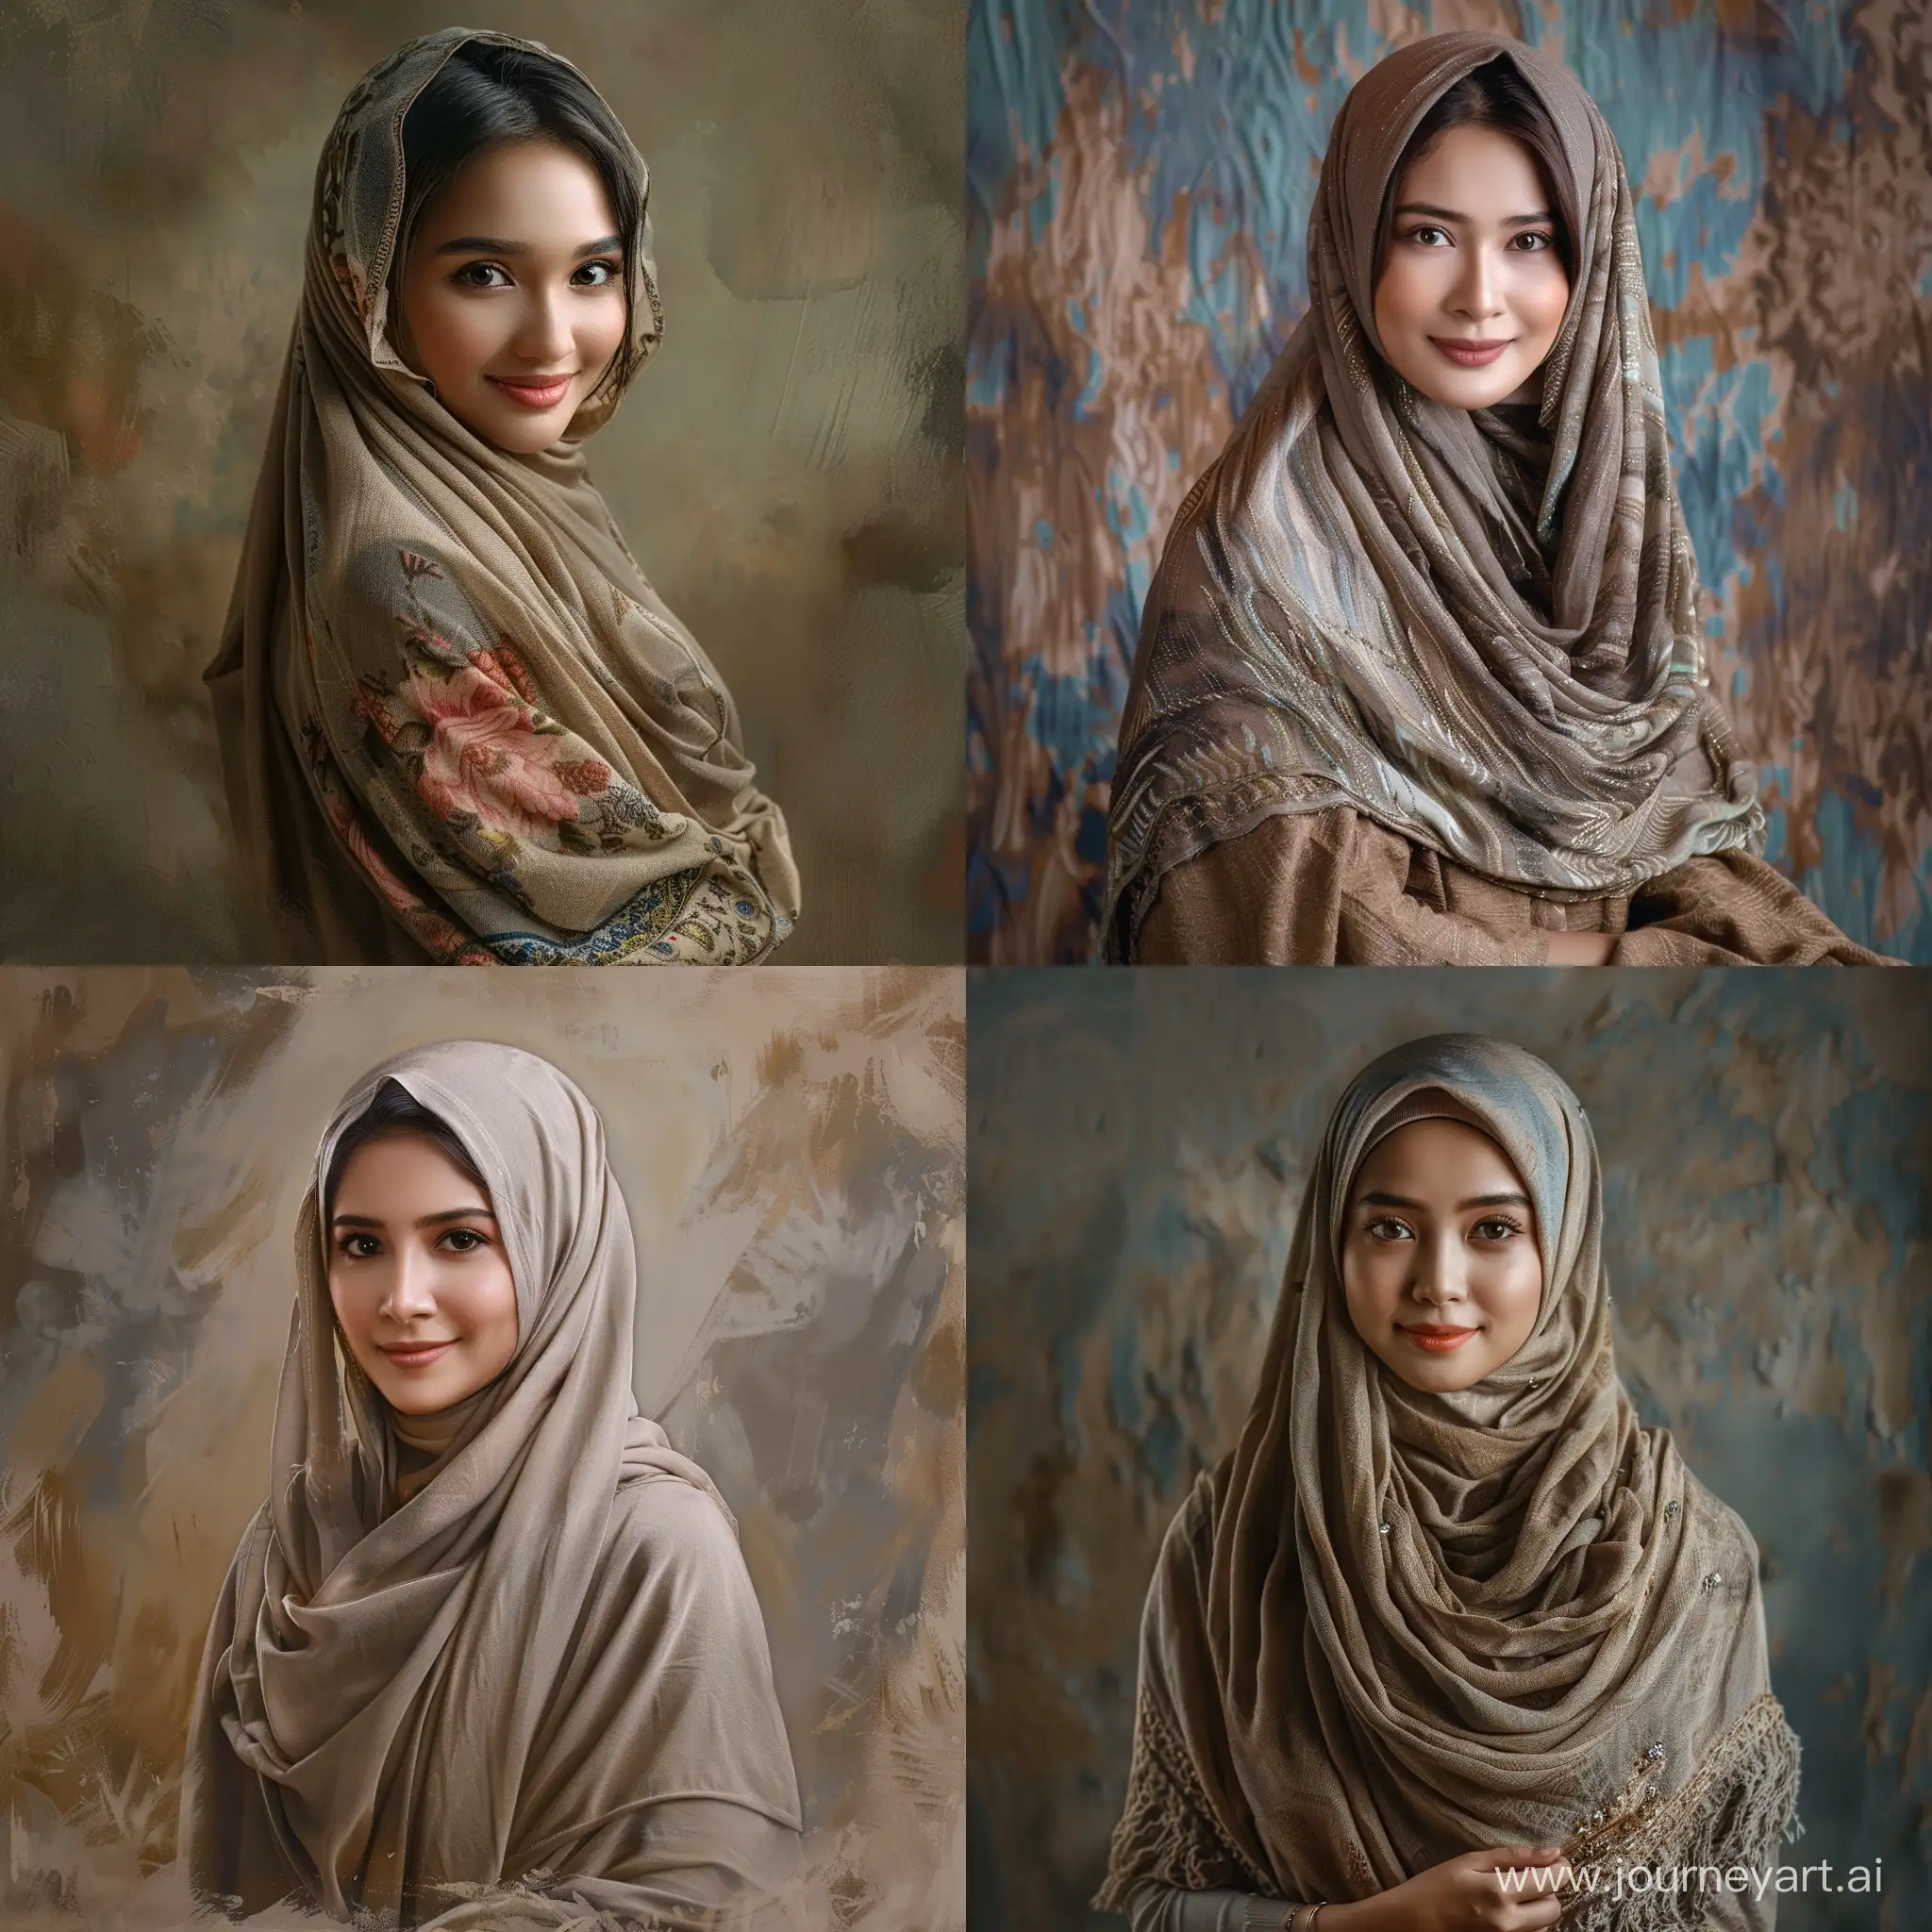 Create a stunning portrait of a stunning malay muslimah with gorgeous loosely dress, showcasing her elegant style and beauty. Pay close attention to the layers of her shawl and the overall composition against a contrasting backdrop. Ensure the lighting highlights her features and brings out the vibrancy of her bright eye and attractive smile. Capture her poised expression and youthful appearance with a sense of confidence and sophistication.